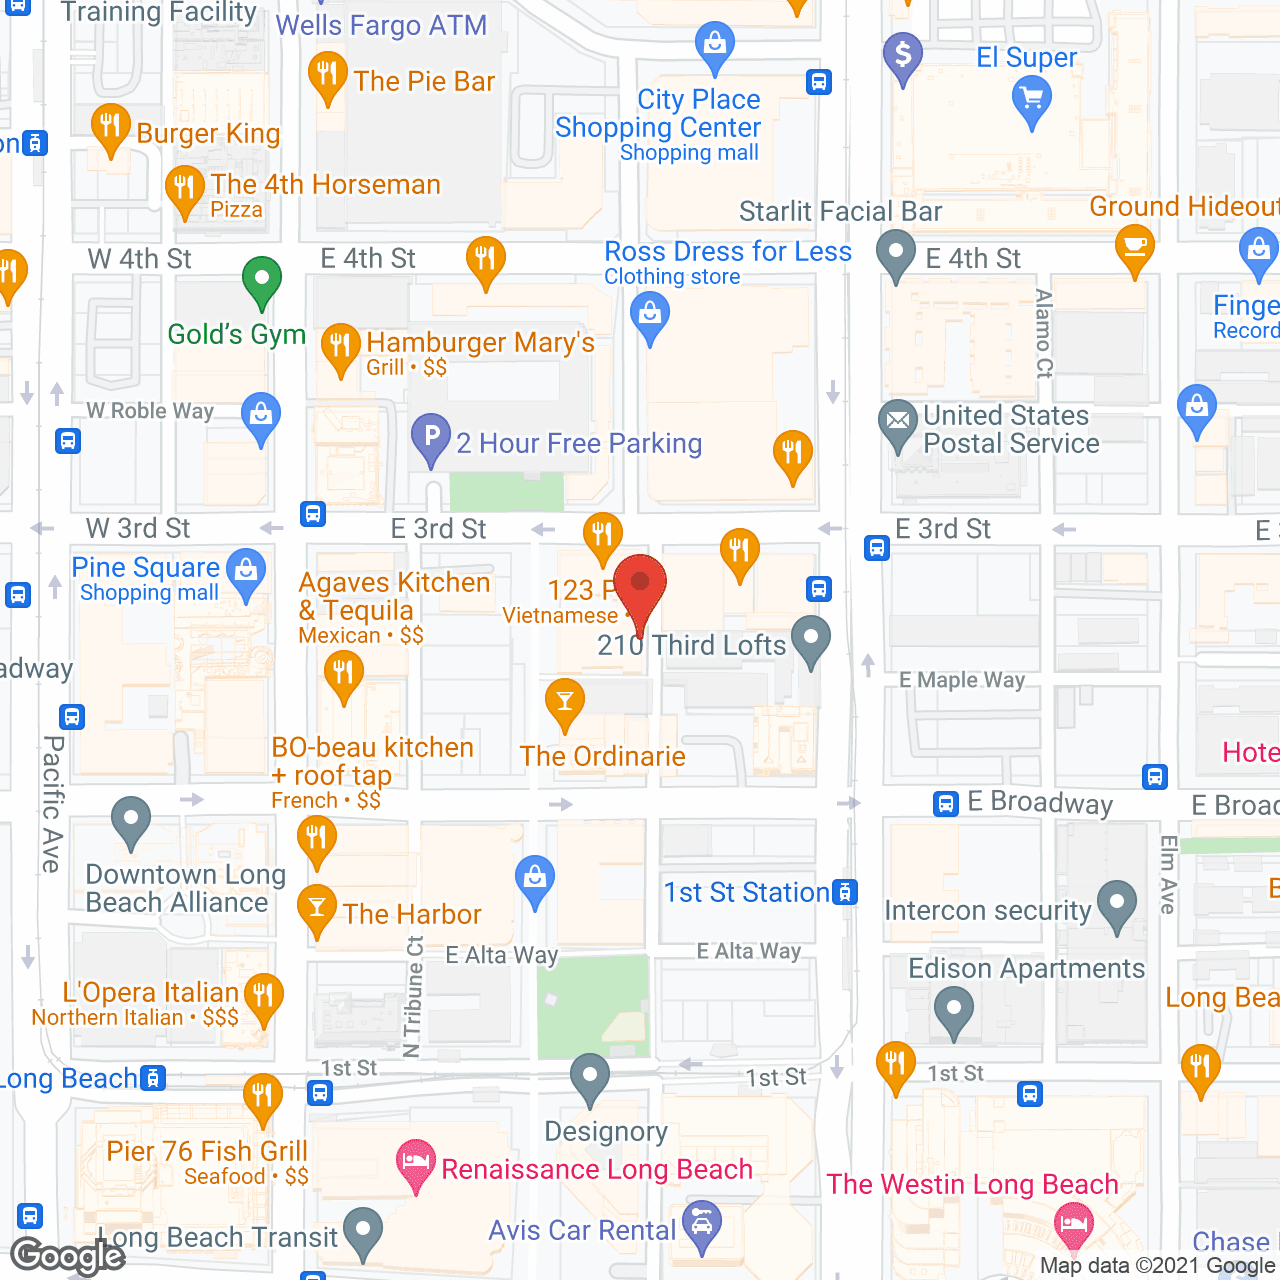 123 Home Care Services Los Angeles l, LLC - Woodland Hills, CA in google map